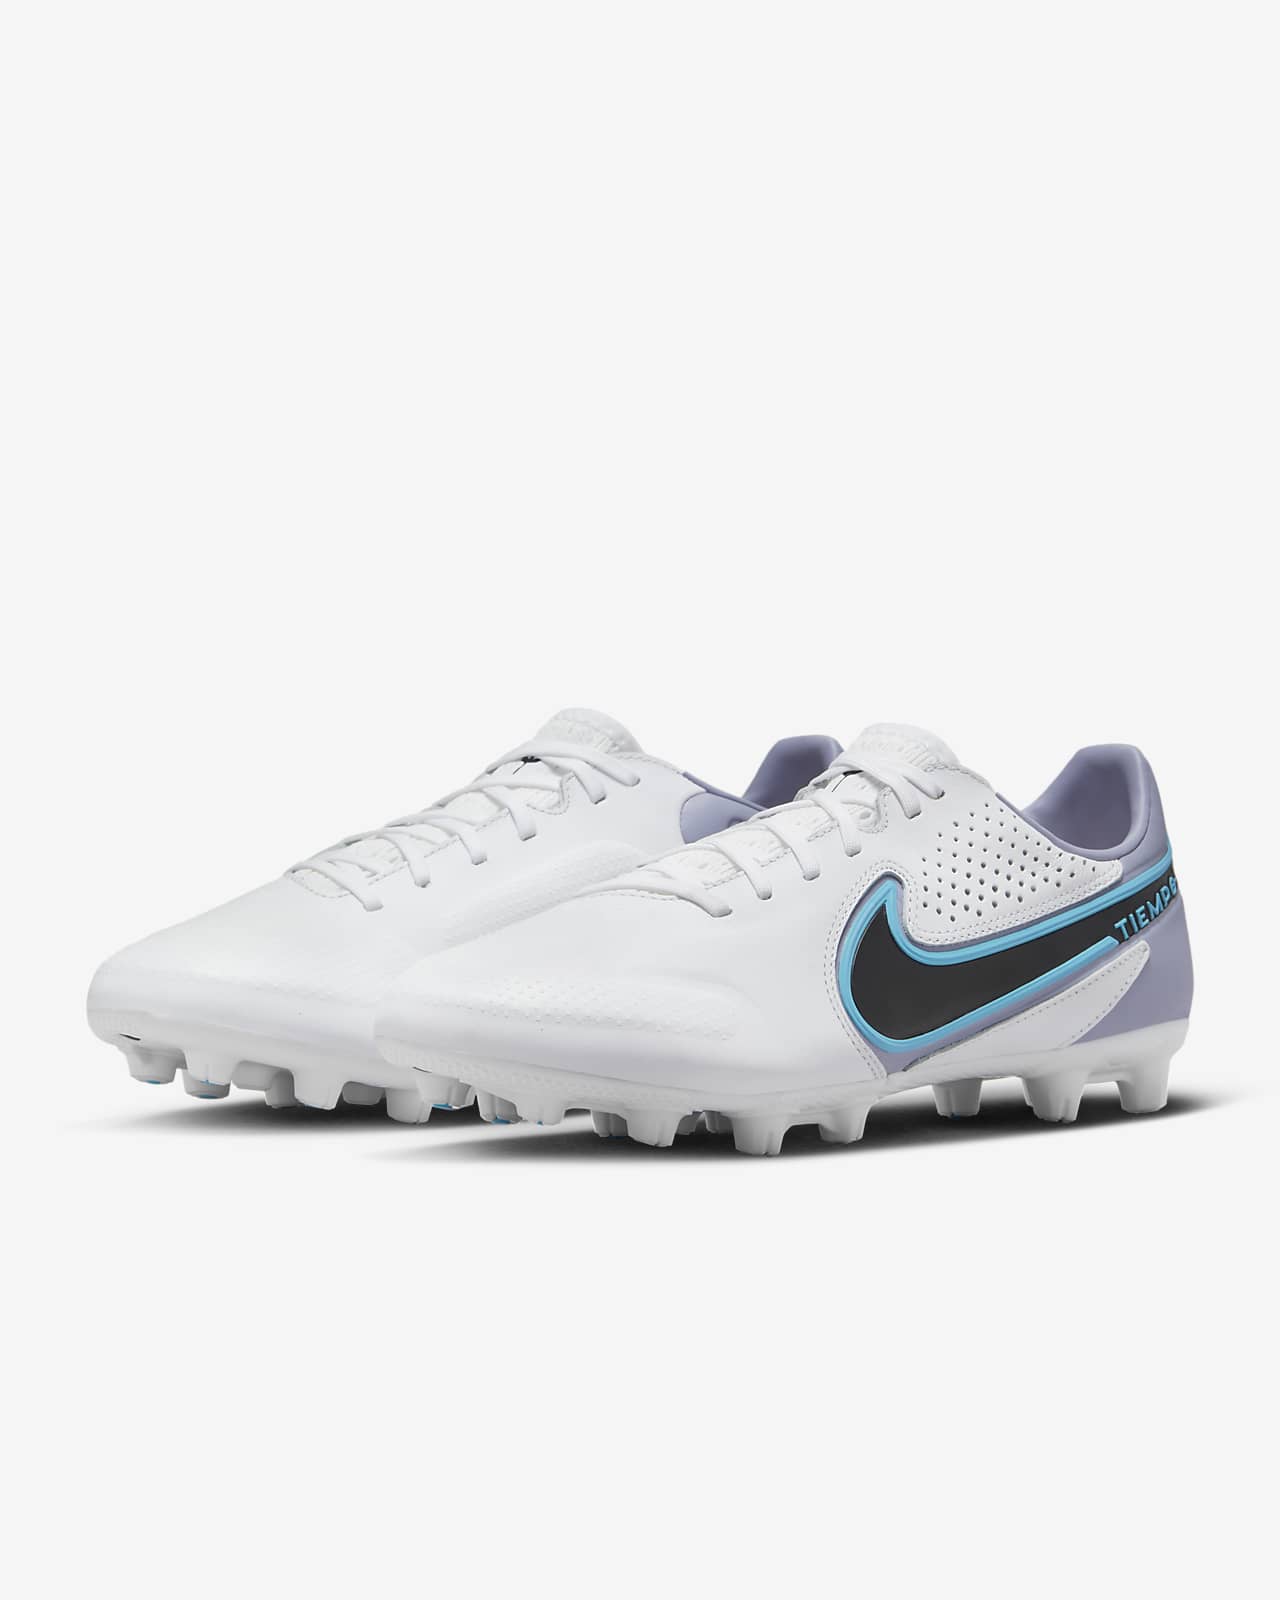 Nike Tiempo Legend 9 Pro HG Hard-Ground Soccer Cleat